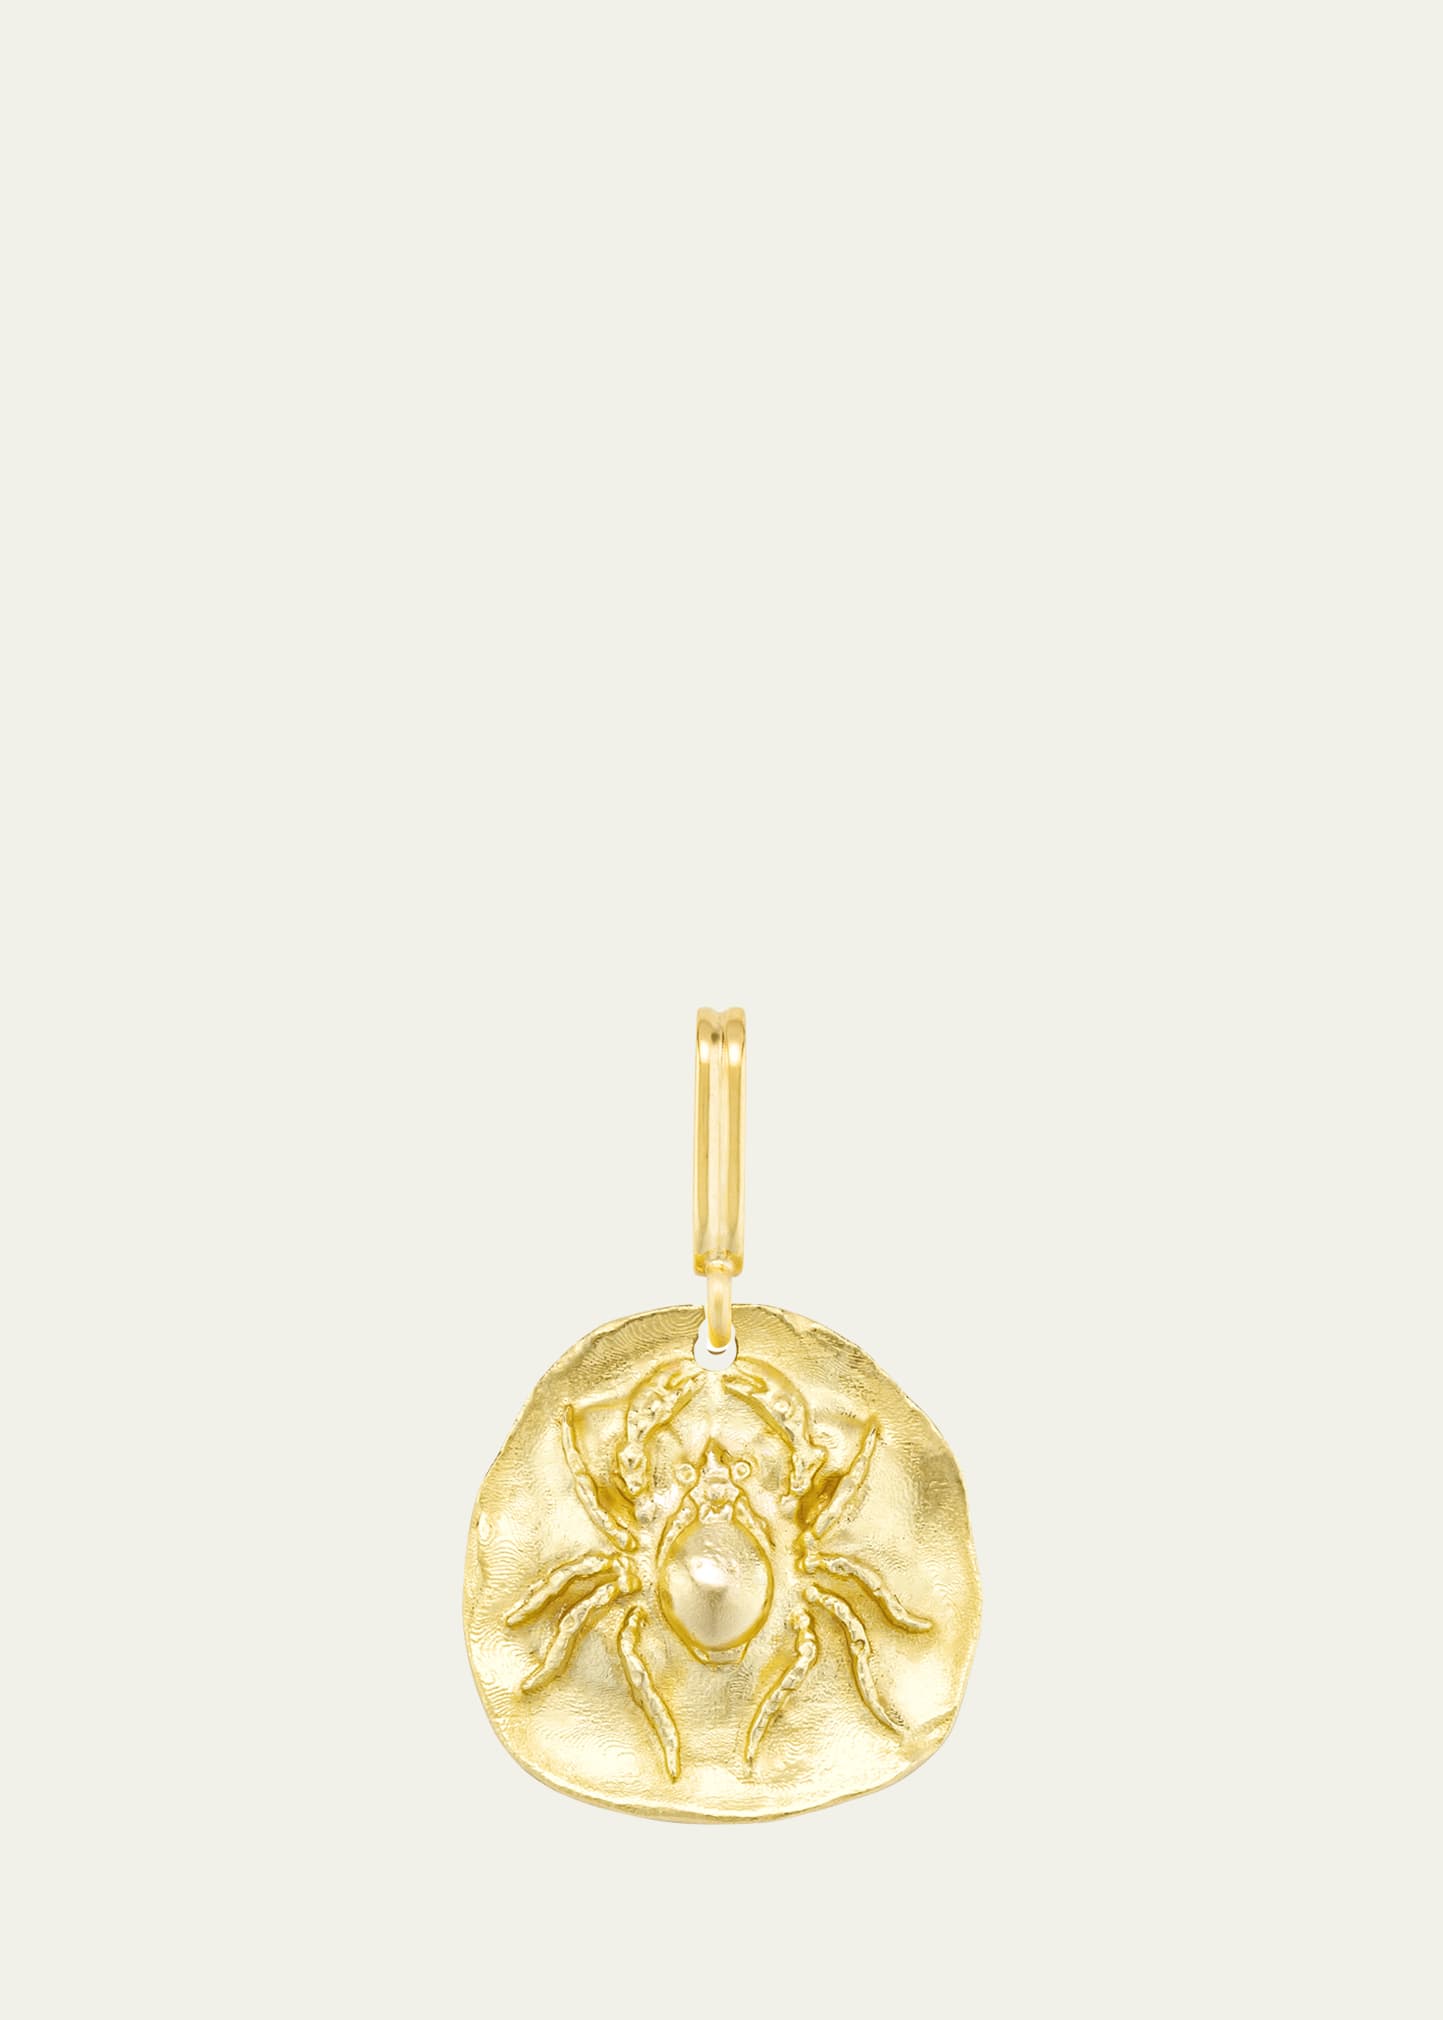 Mellerio 18k Yellow Gold Spider Medal Charm